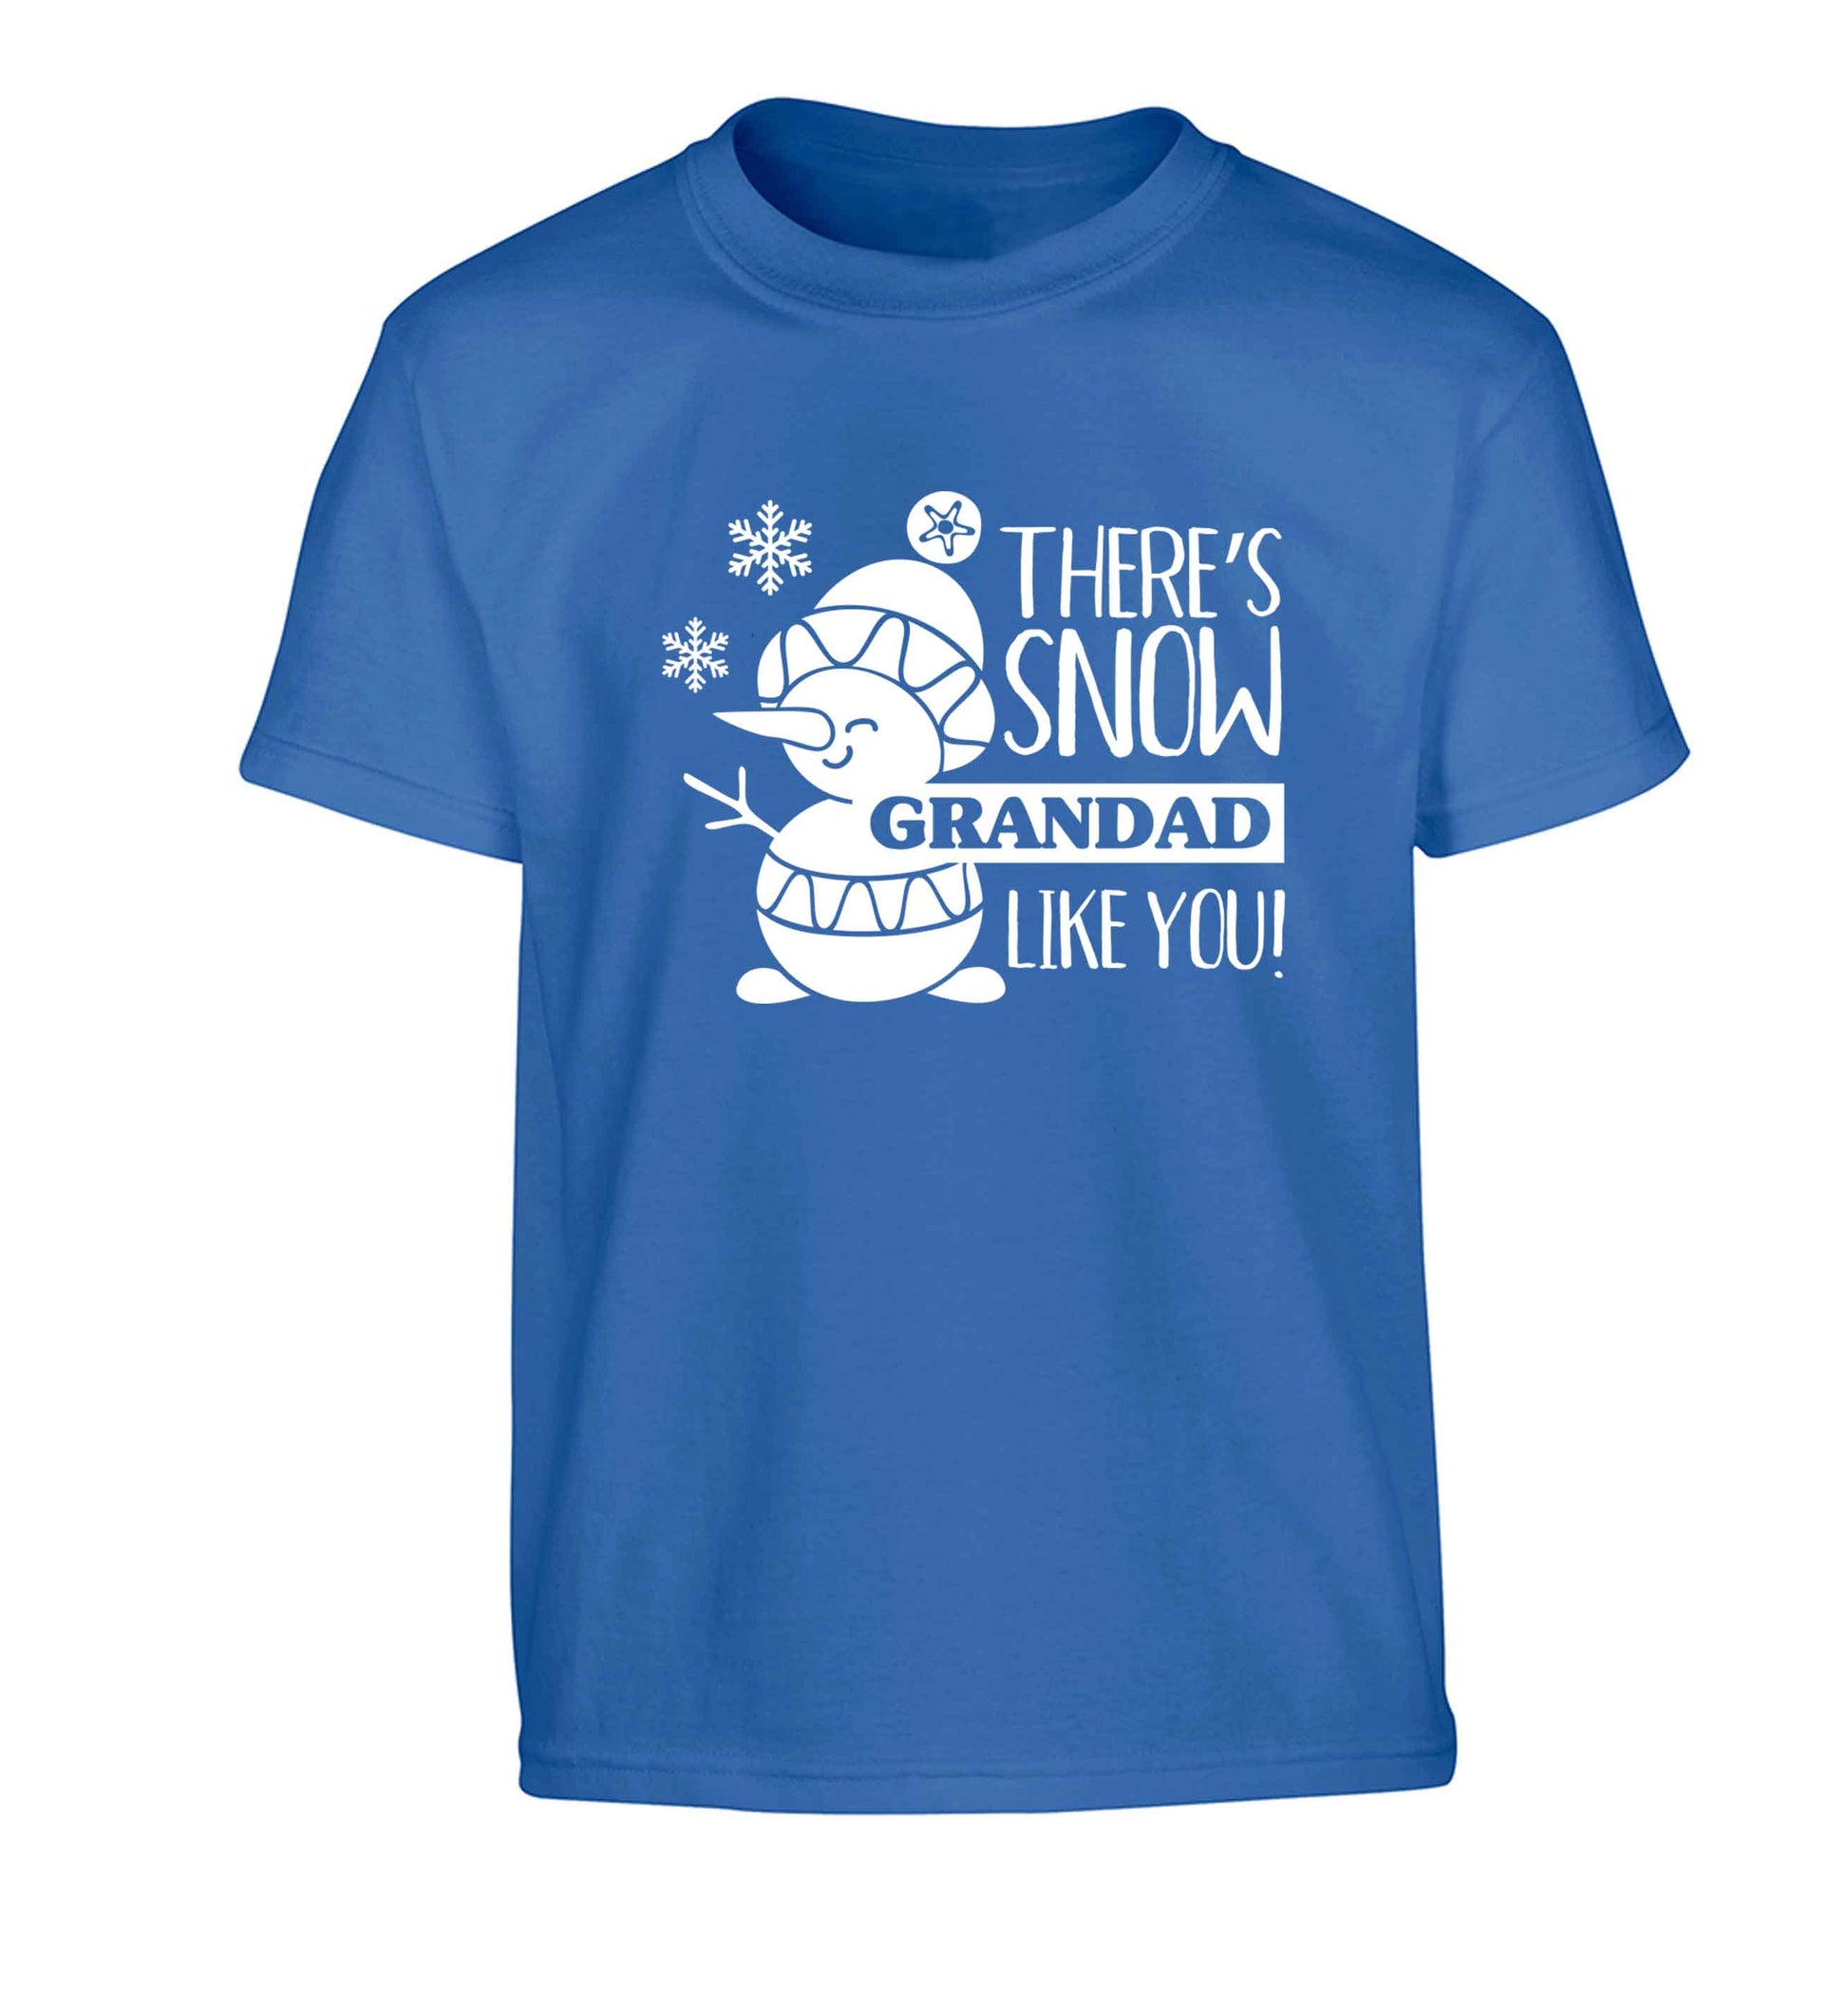 There's snow grandad like you Children's blue Tshirt 12-13 Years